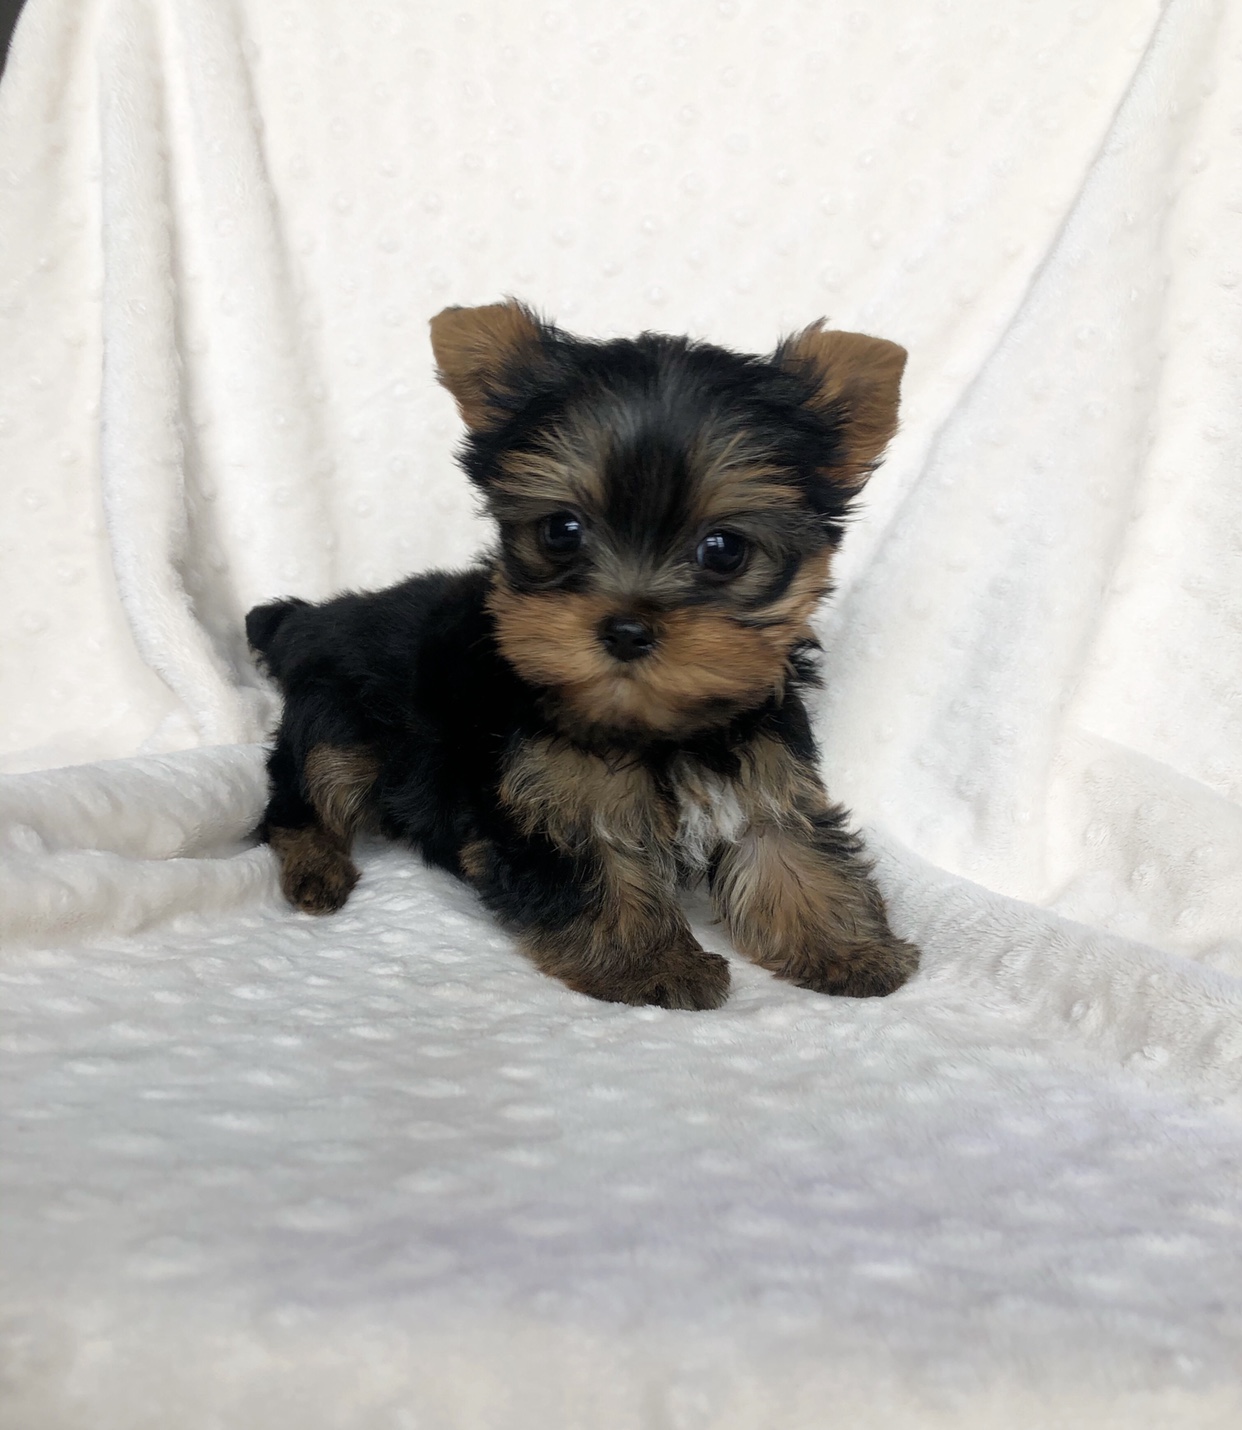 Micro Teacup Yorkie Yorkshire Terrier Puppy! - iHeartTeacups